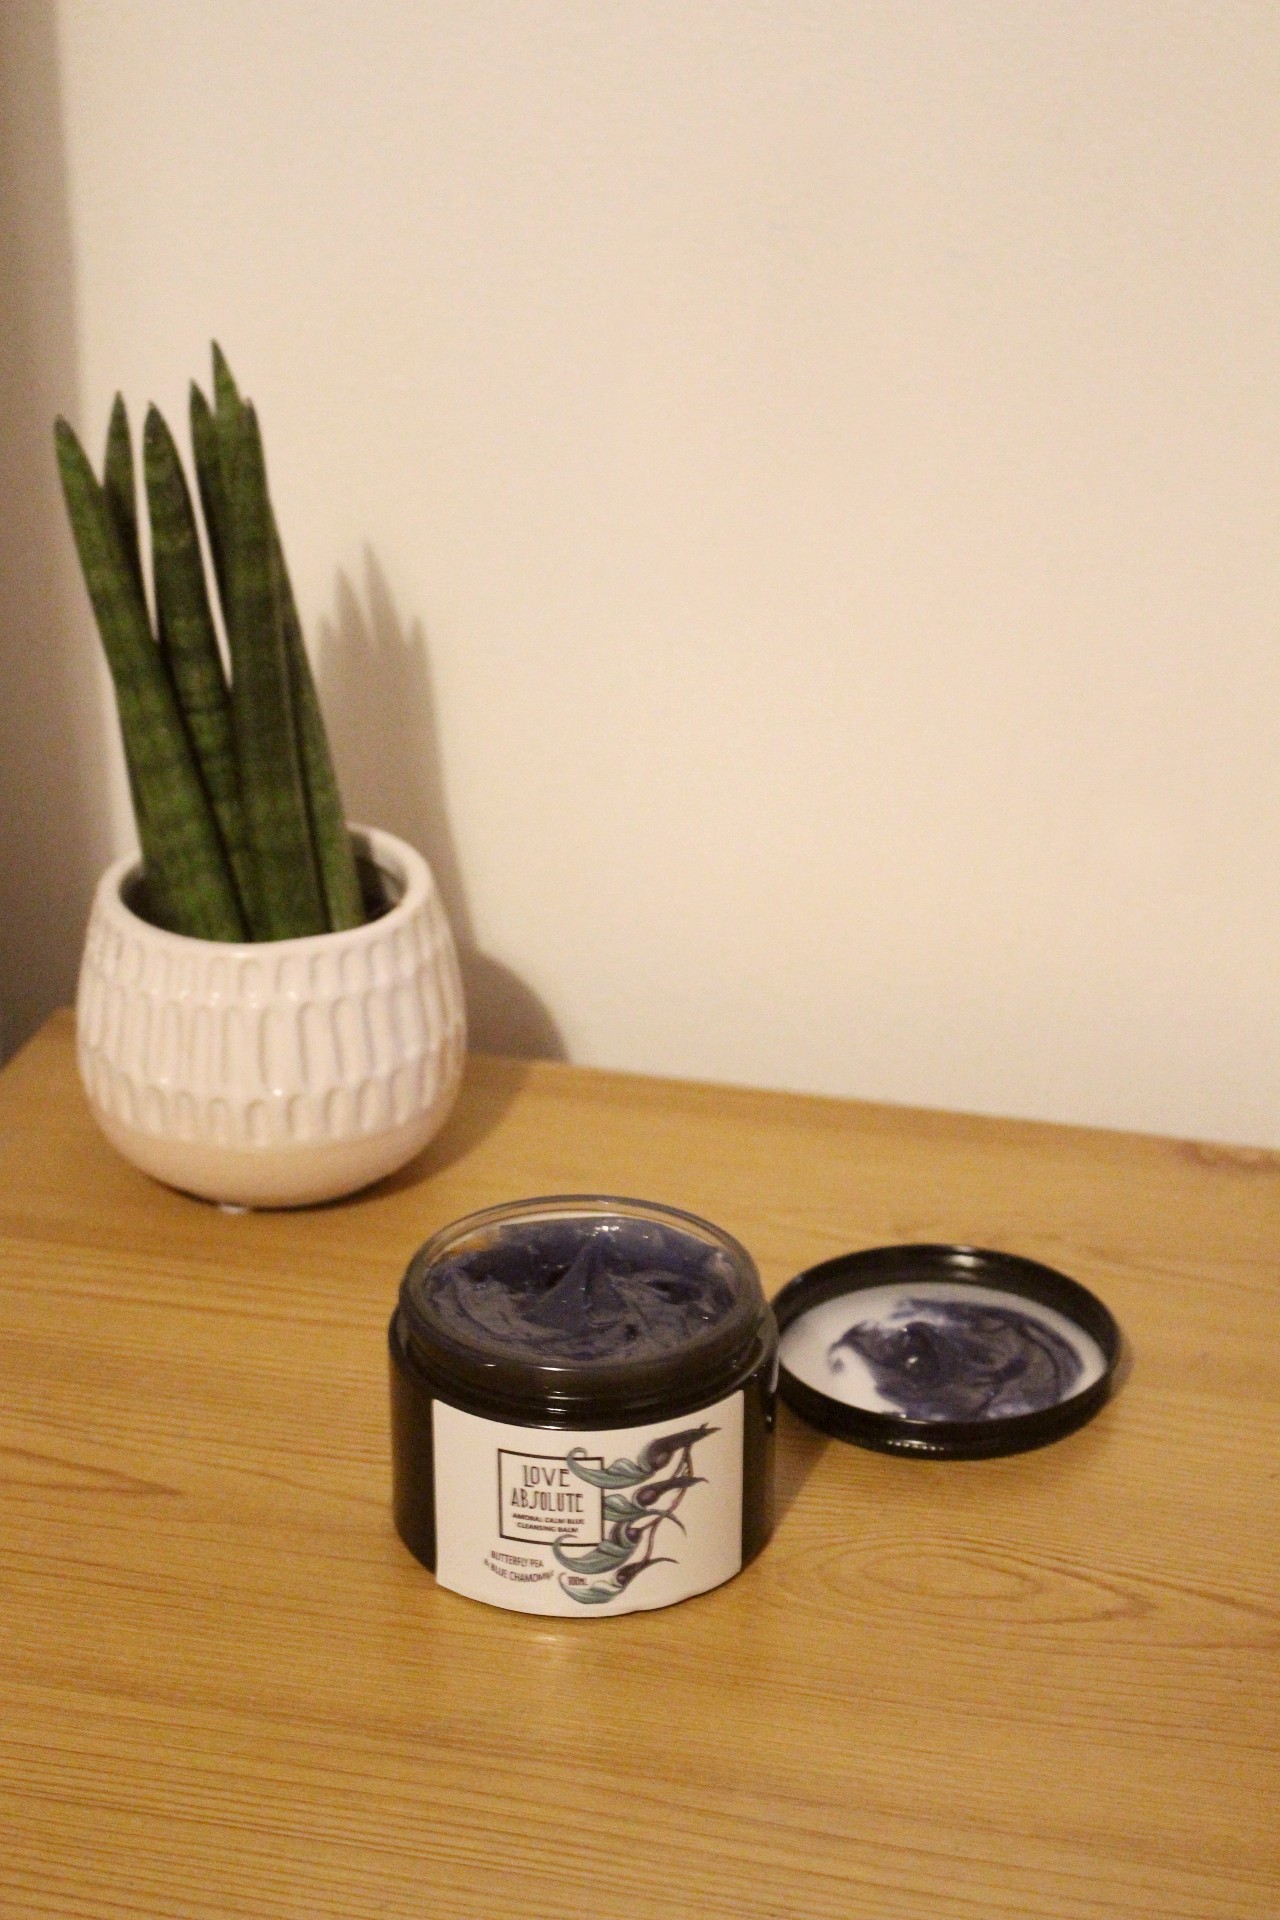 A dark coloured jar sat on a brown wooden surface. The jar has its lid removed and you can see a blue-purple product inside. The label on the jar reads "Love Absolute Amoral Calm Blue Cleansing Balm". In the background is a green succulent plant in a white pot.